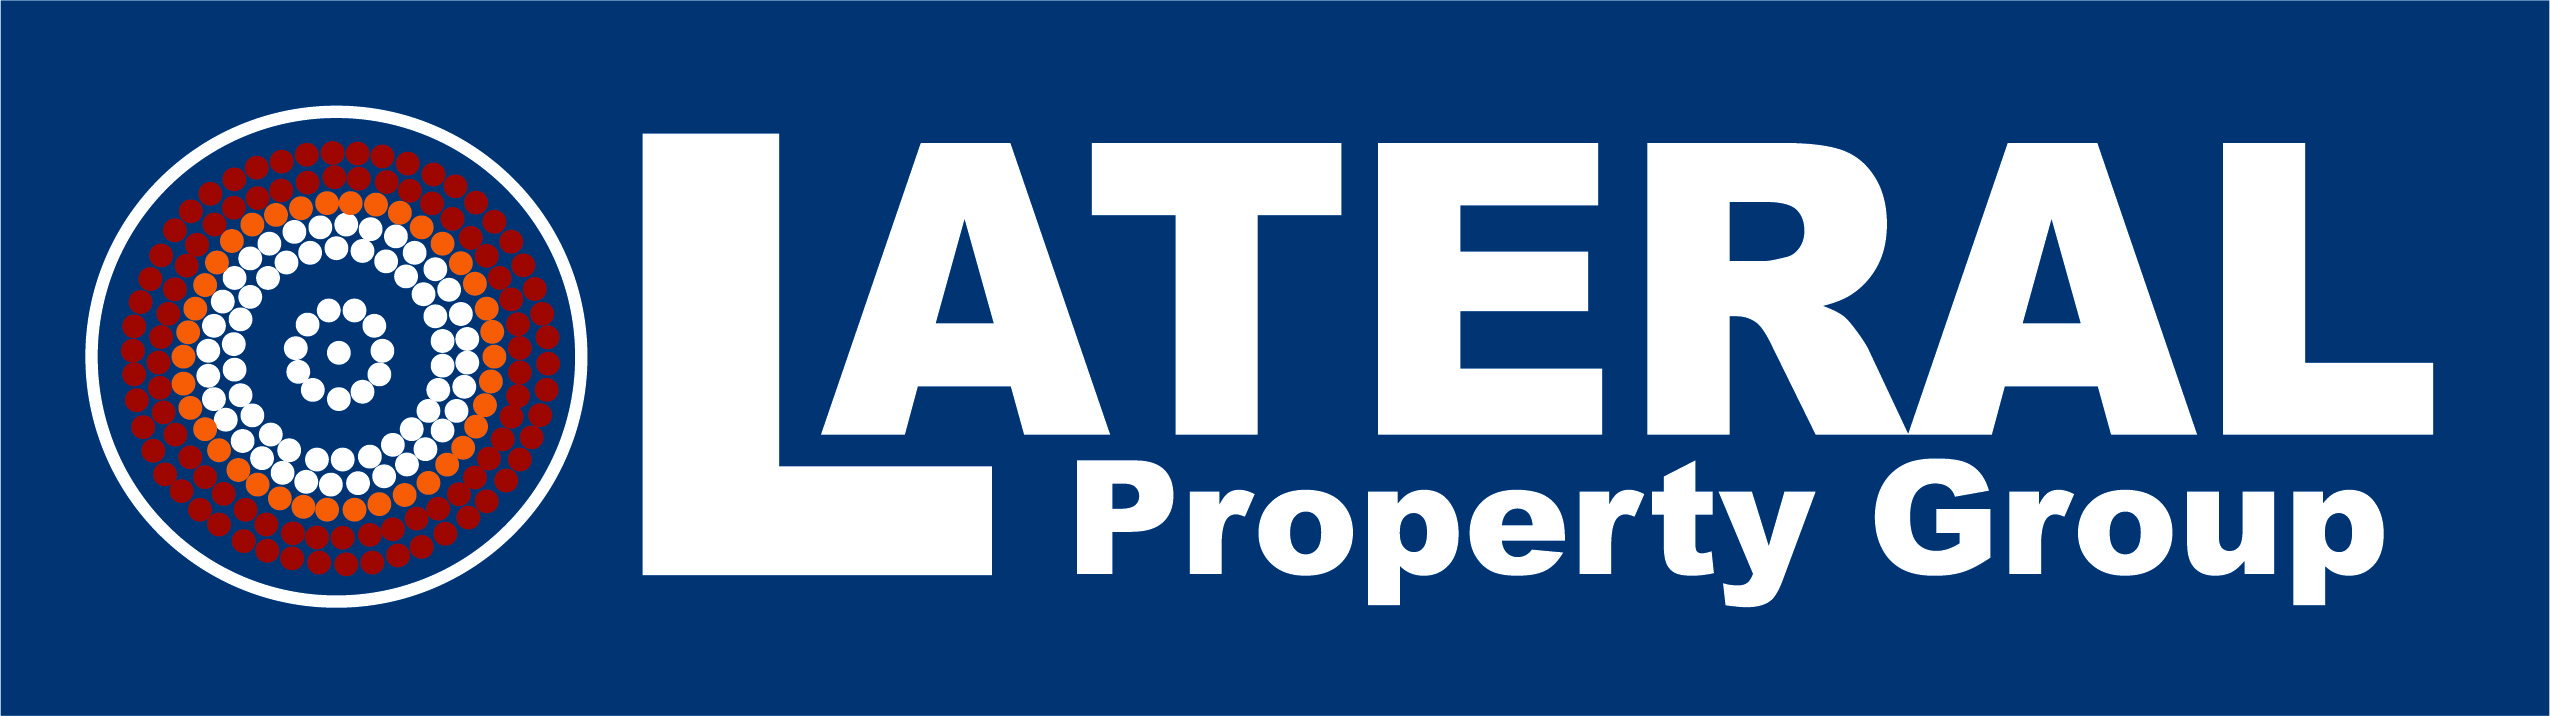 Lateral Property Group